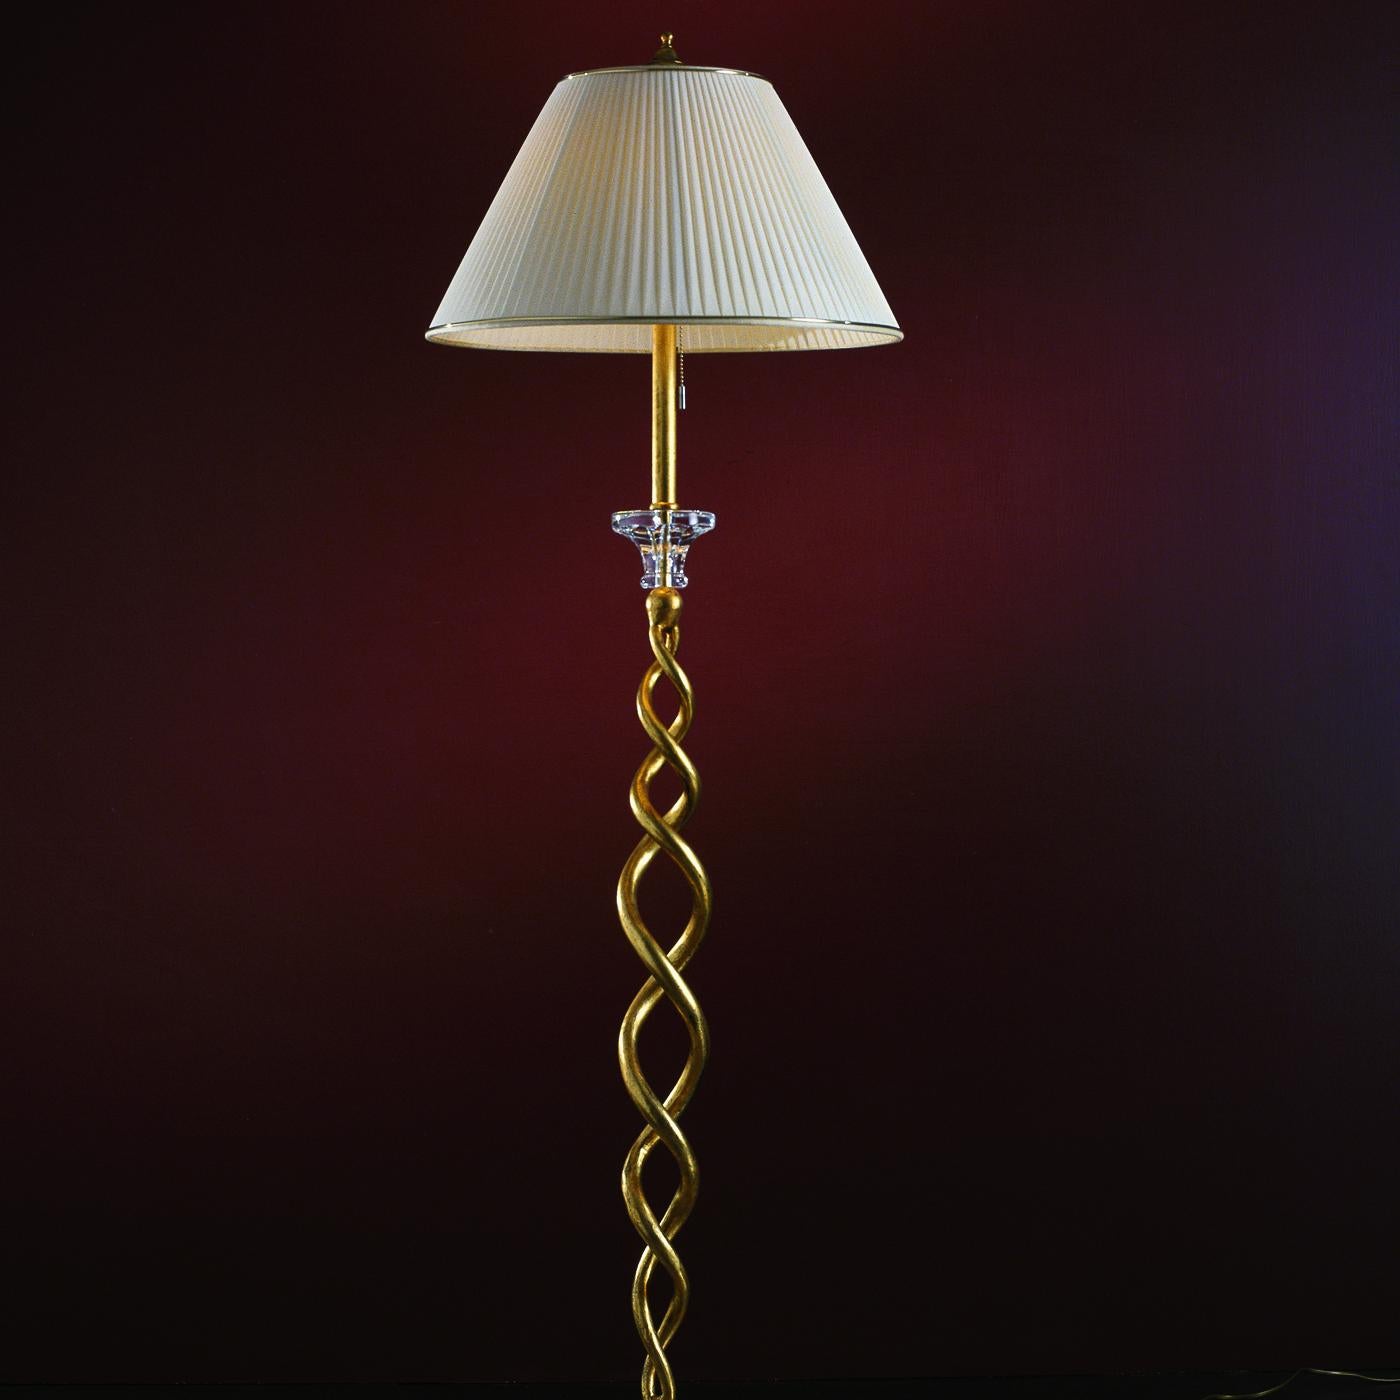 A true masterpiece that will provide ambient lighting in Classic living and dining rooms, while infusing timeless style and elegance, this floor lamp is entirely hand forged of iron with an antique gold-leaf finish. Diffusing the light from a